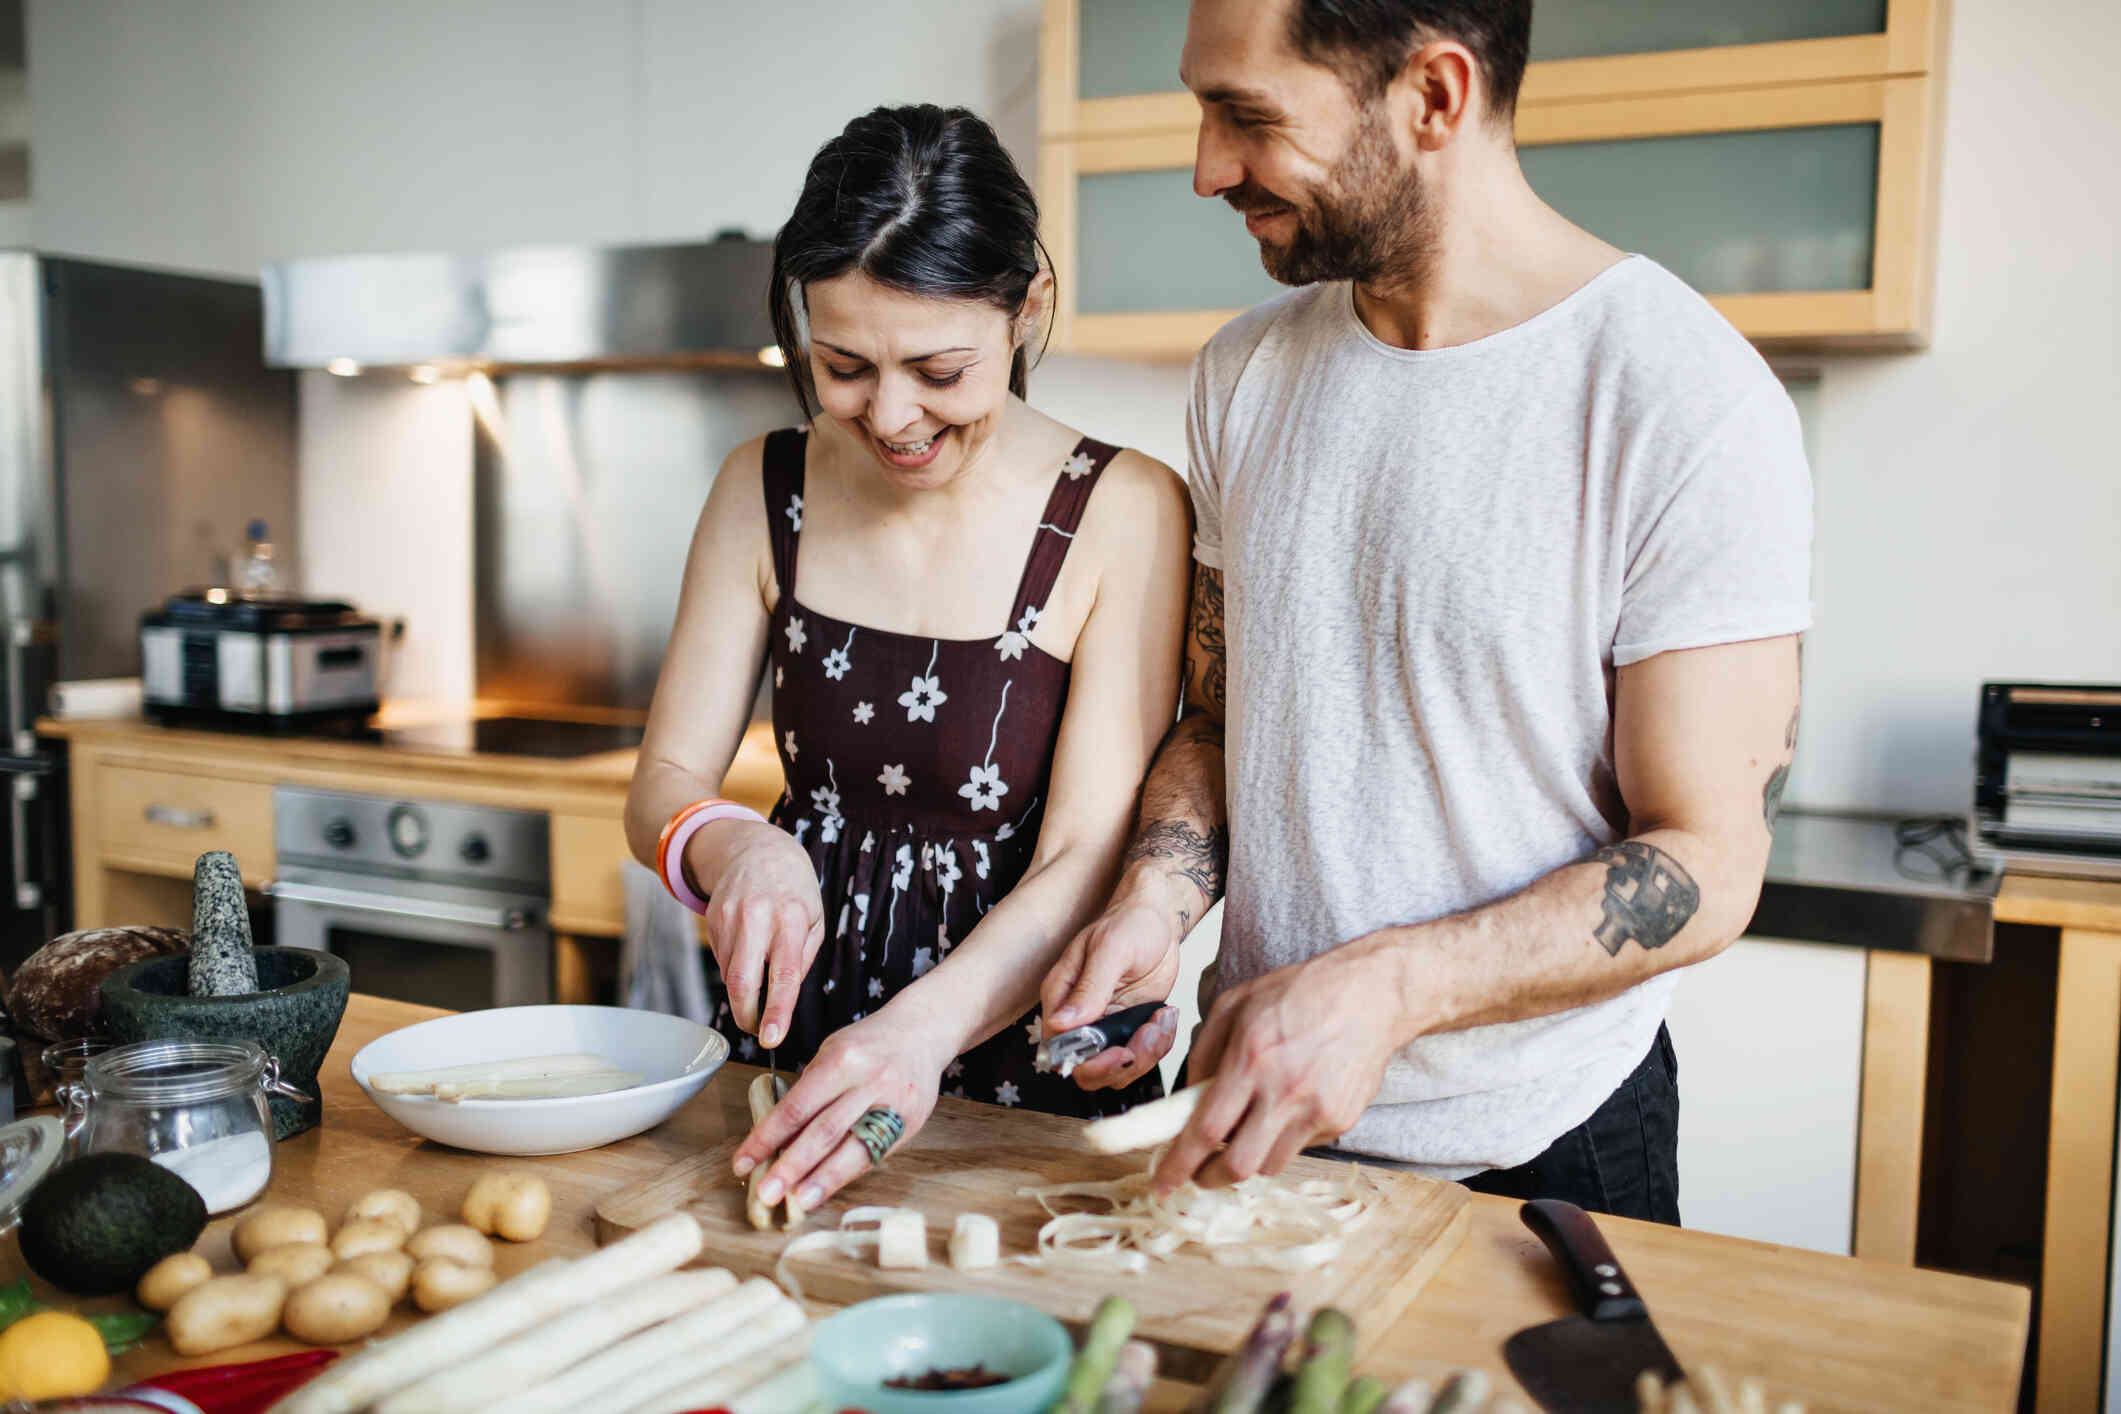 A male and female couple stand side by side in the kitchen and chop vegitables together while smiling.